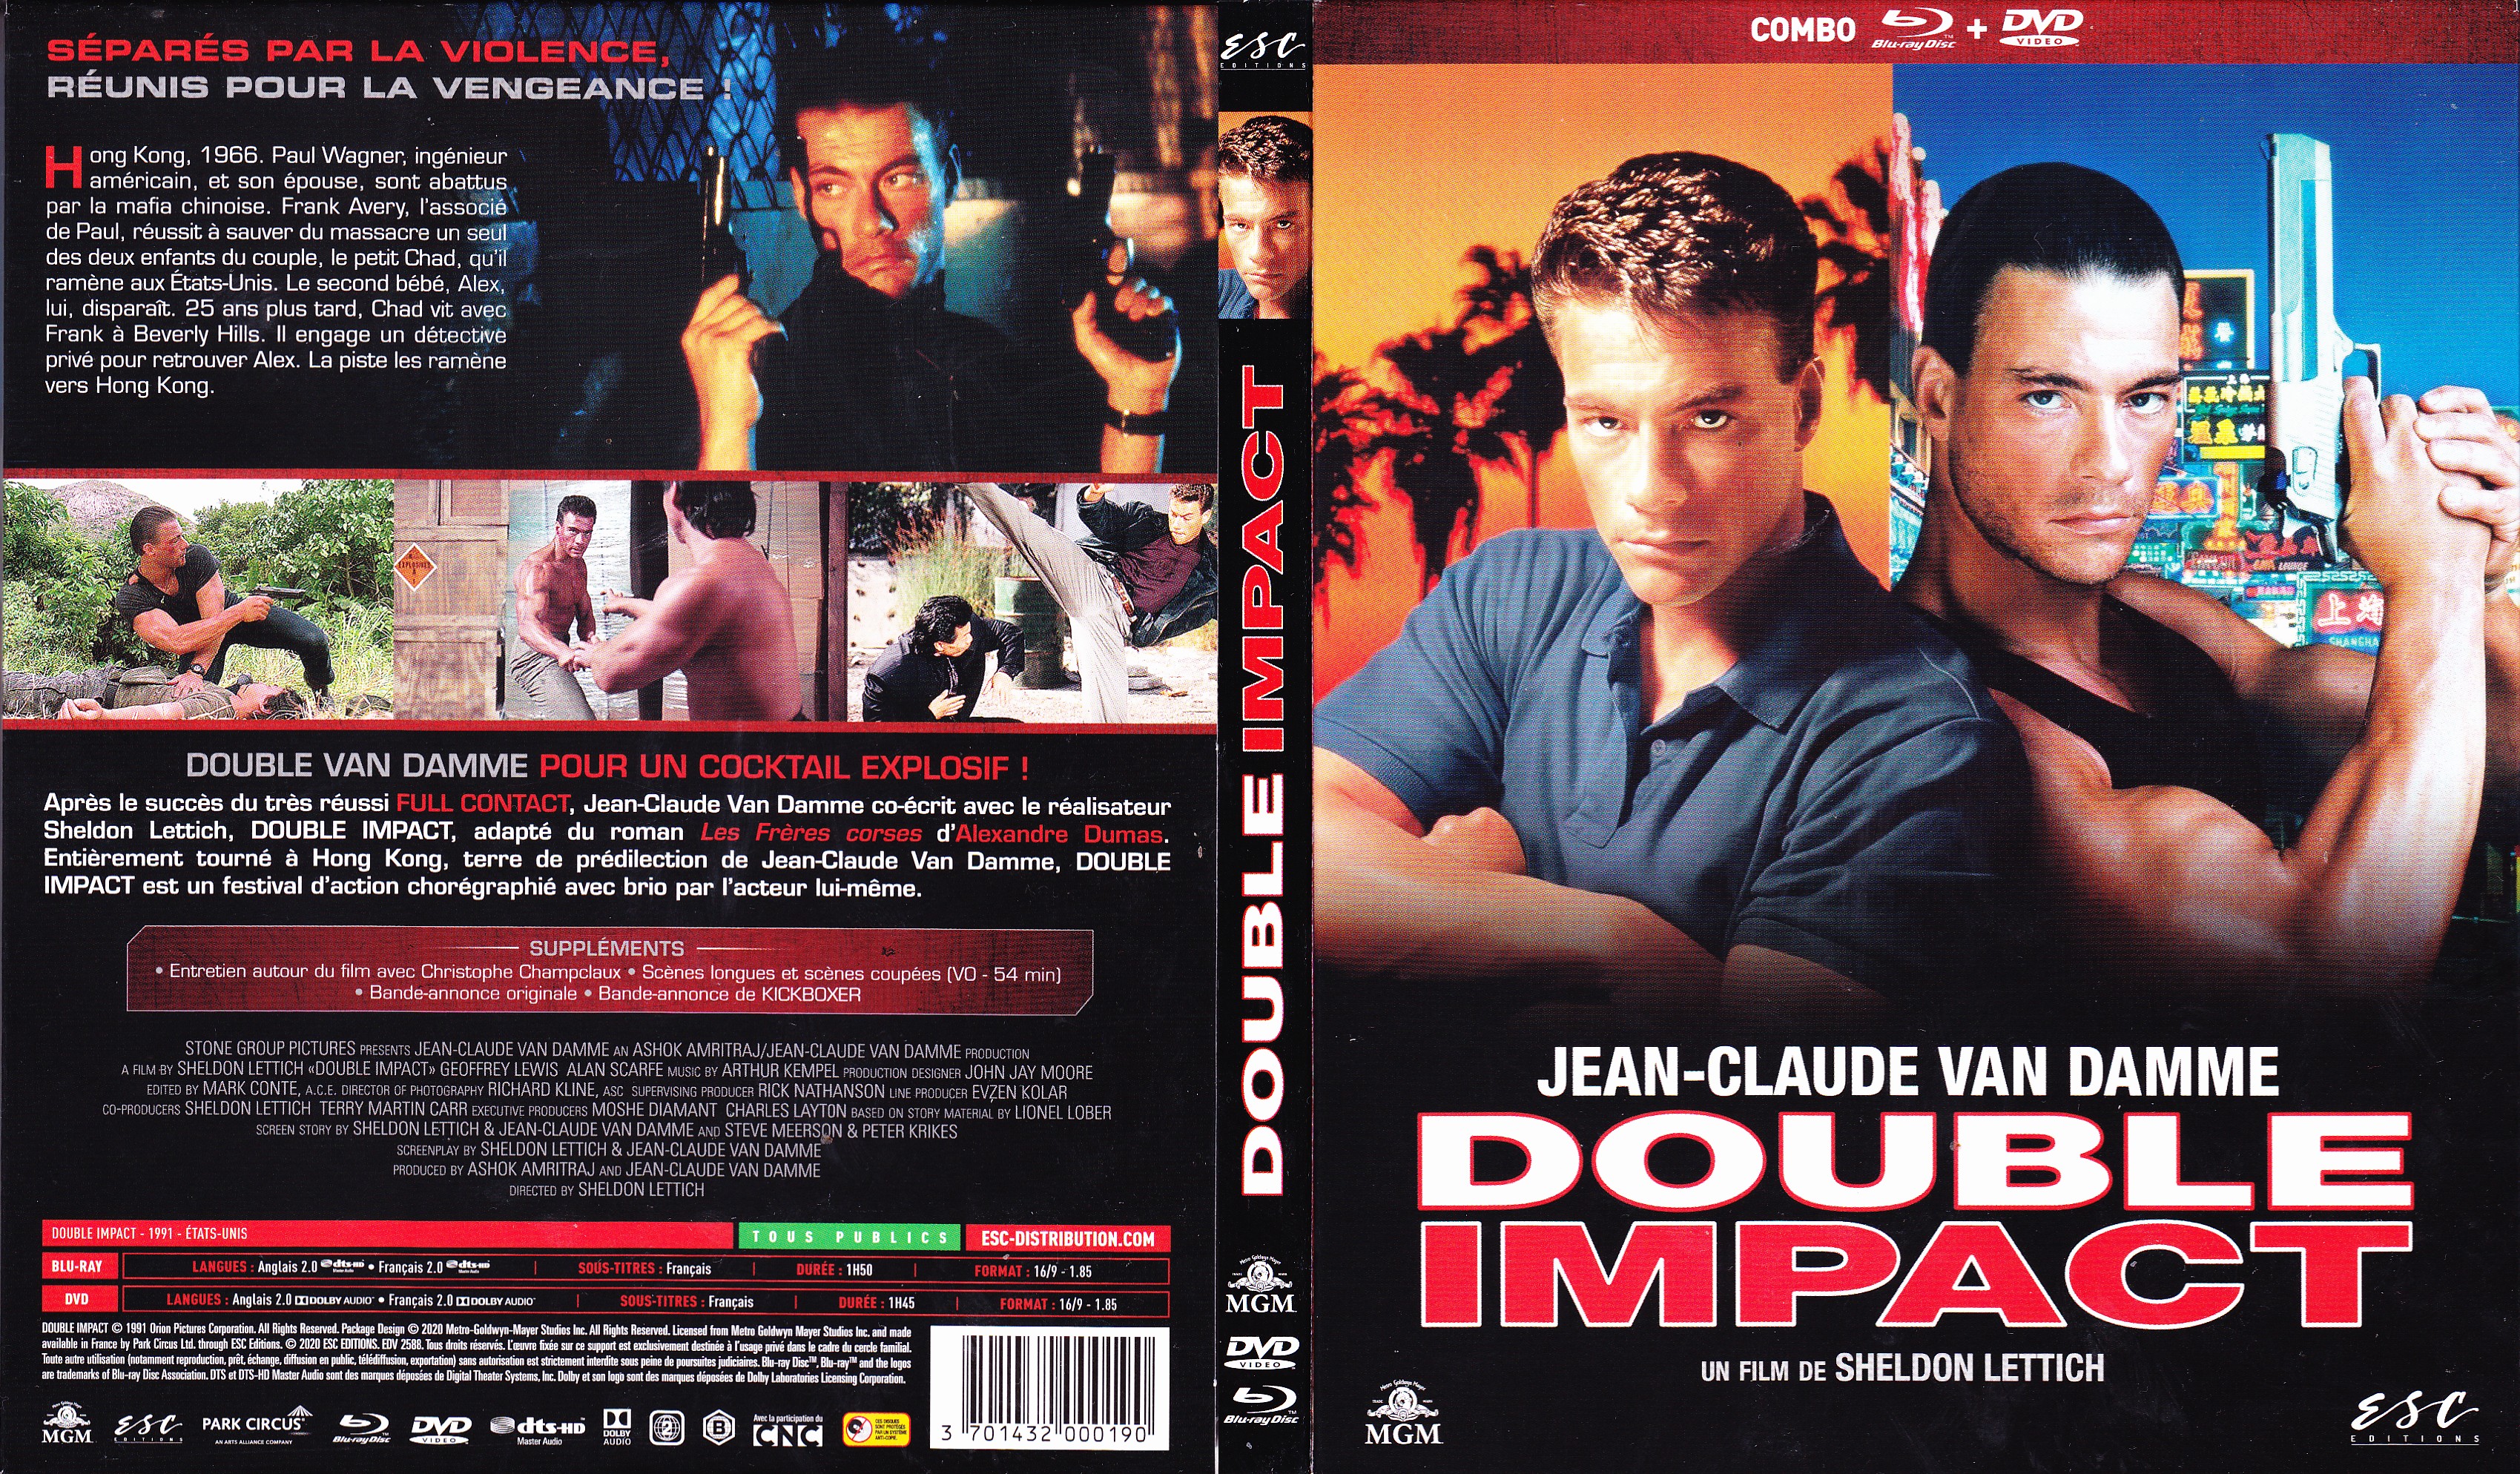 Jaquette DVD Double impact (BLU-RAY) v2